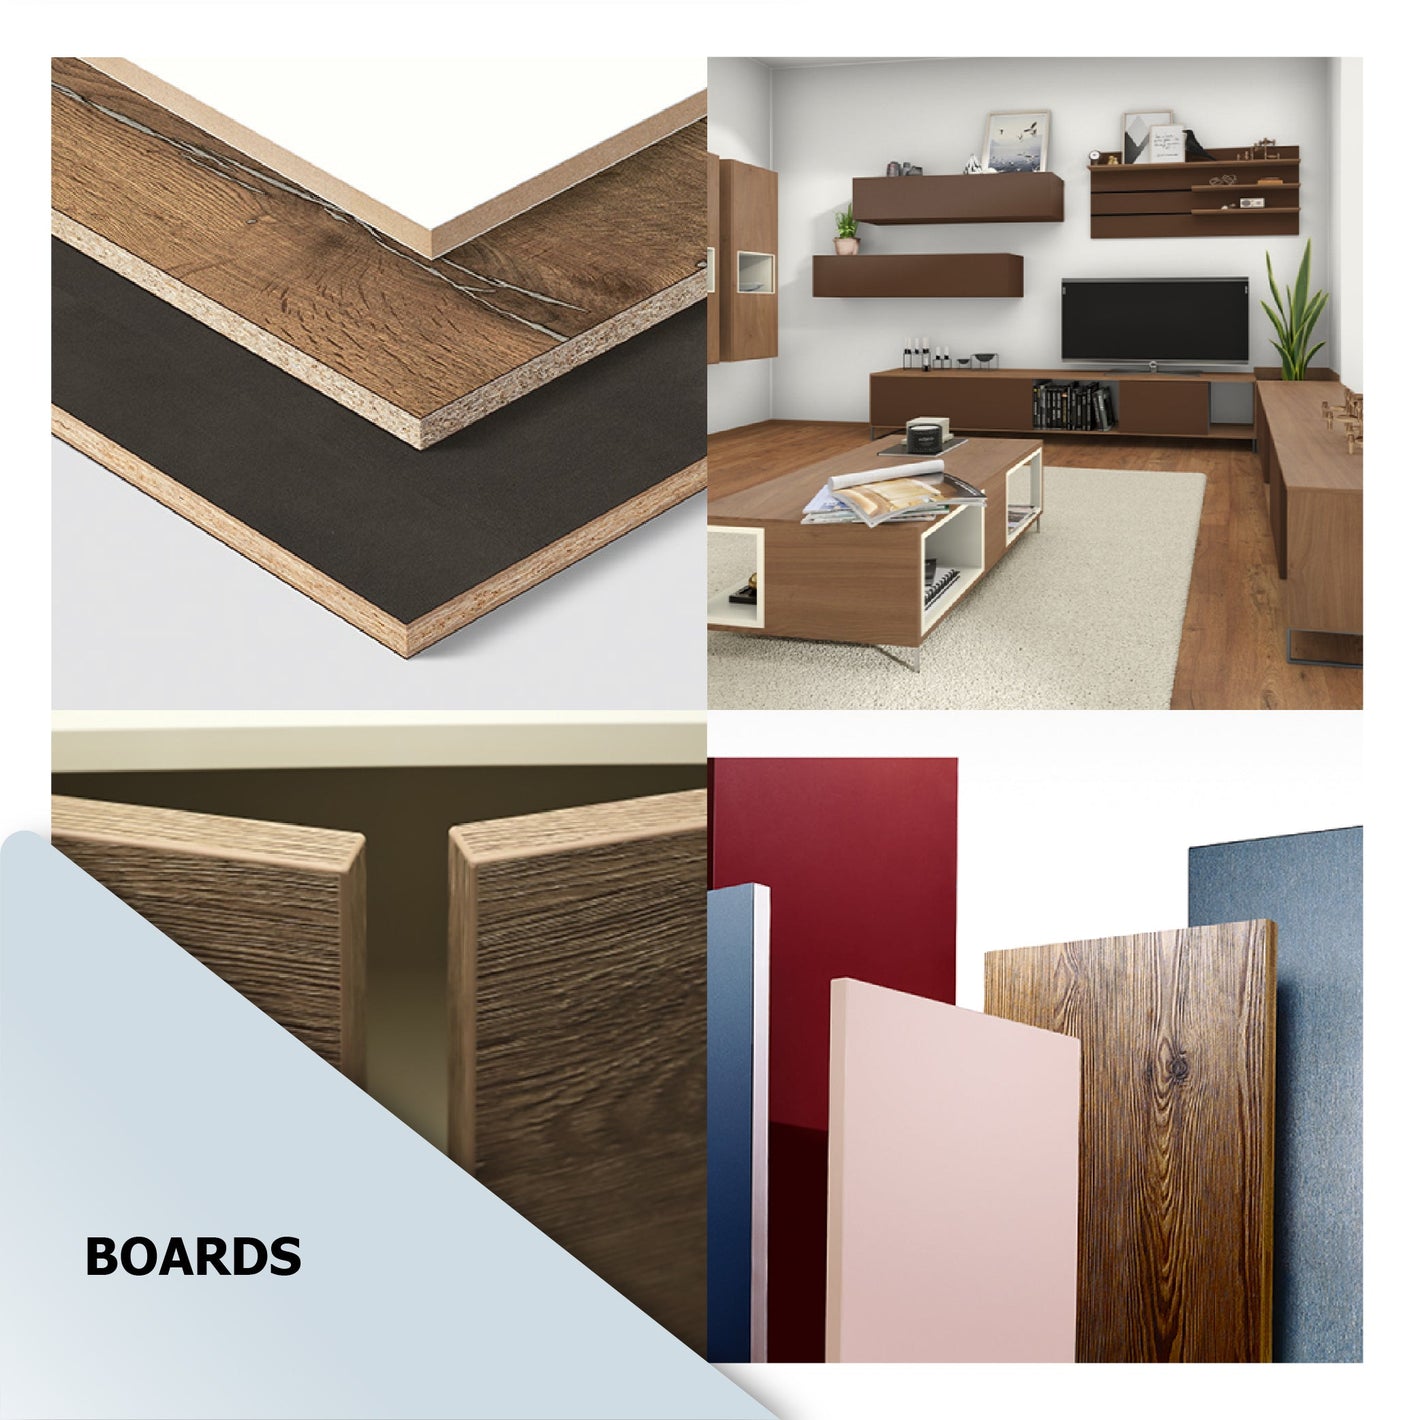 Elevate your space with decorative boards by M. M. Noorbhoy & Co - High-quality, stylish additions for your home or office decor.